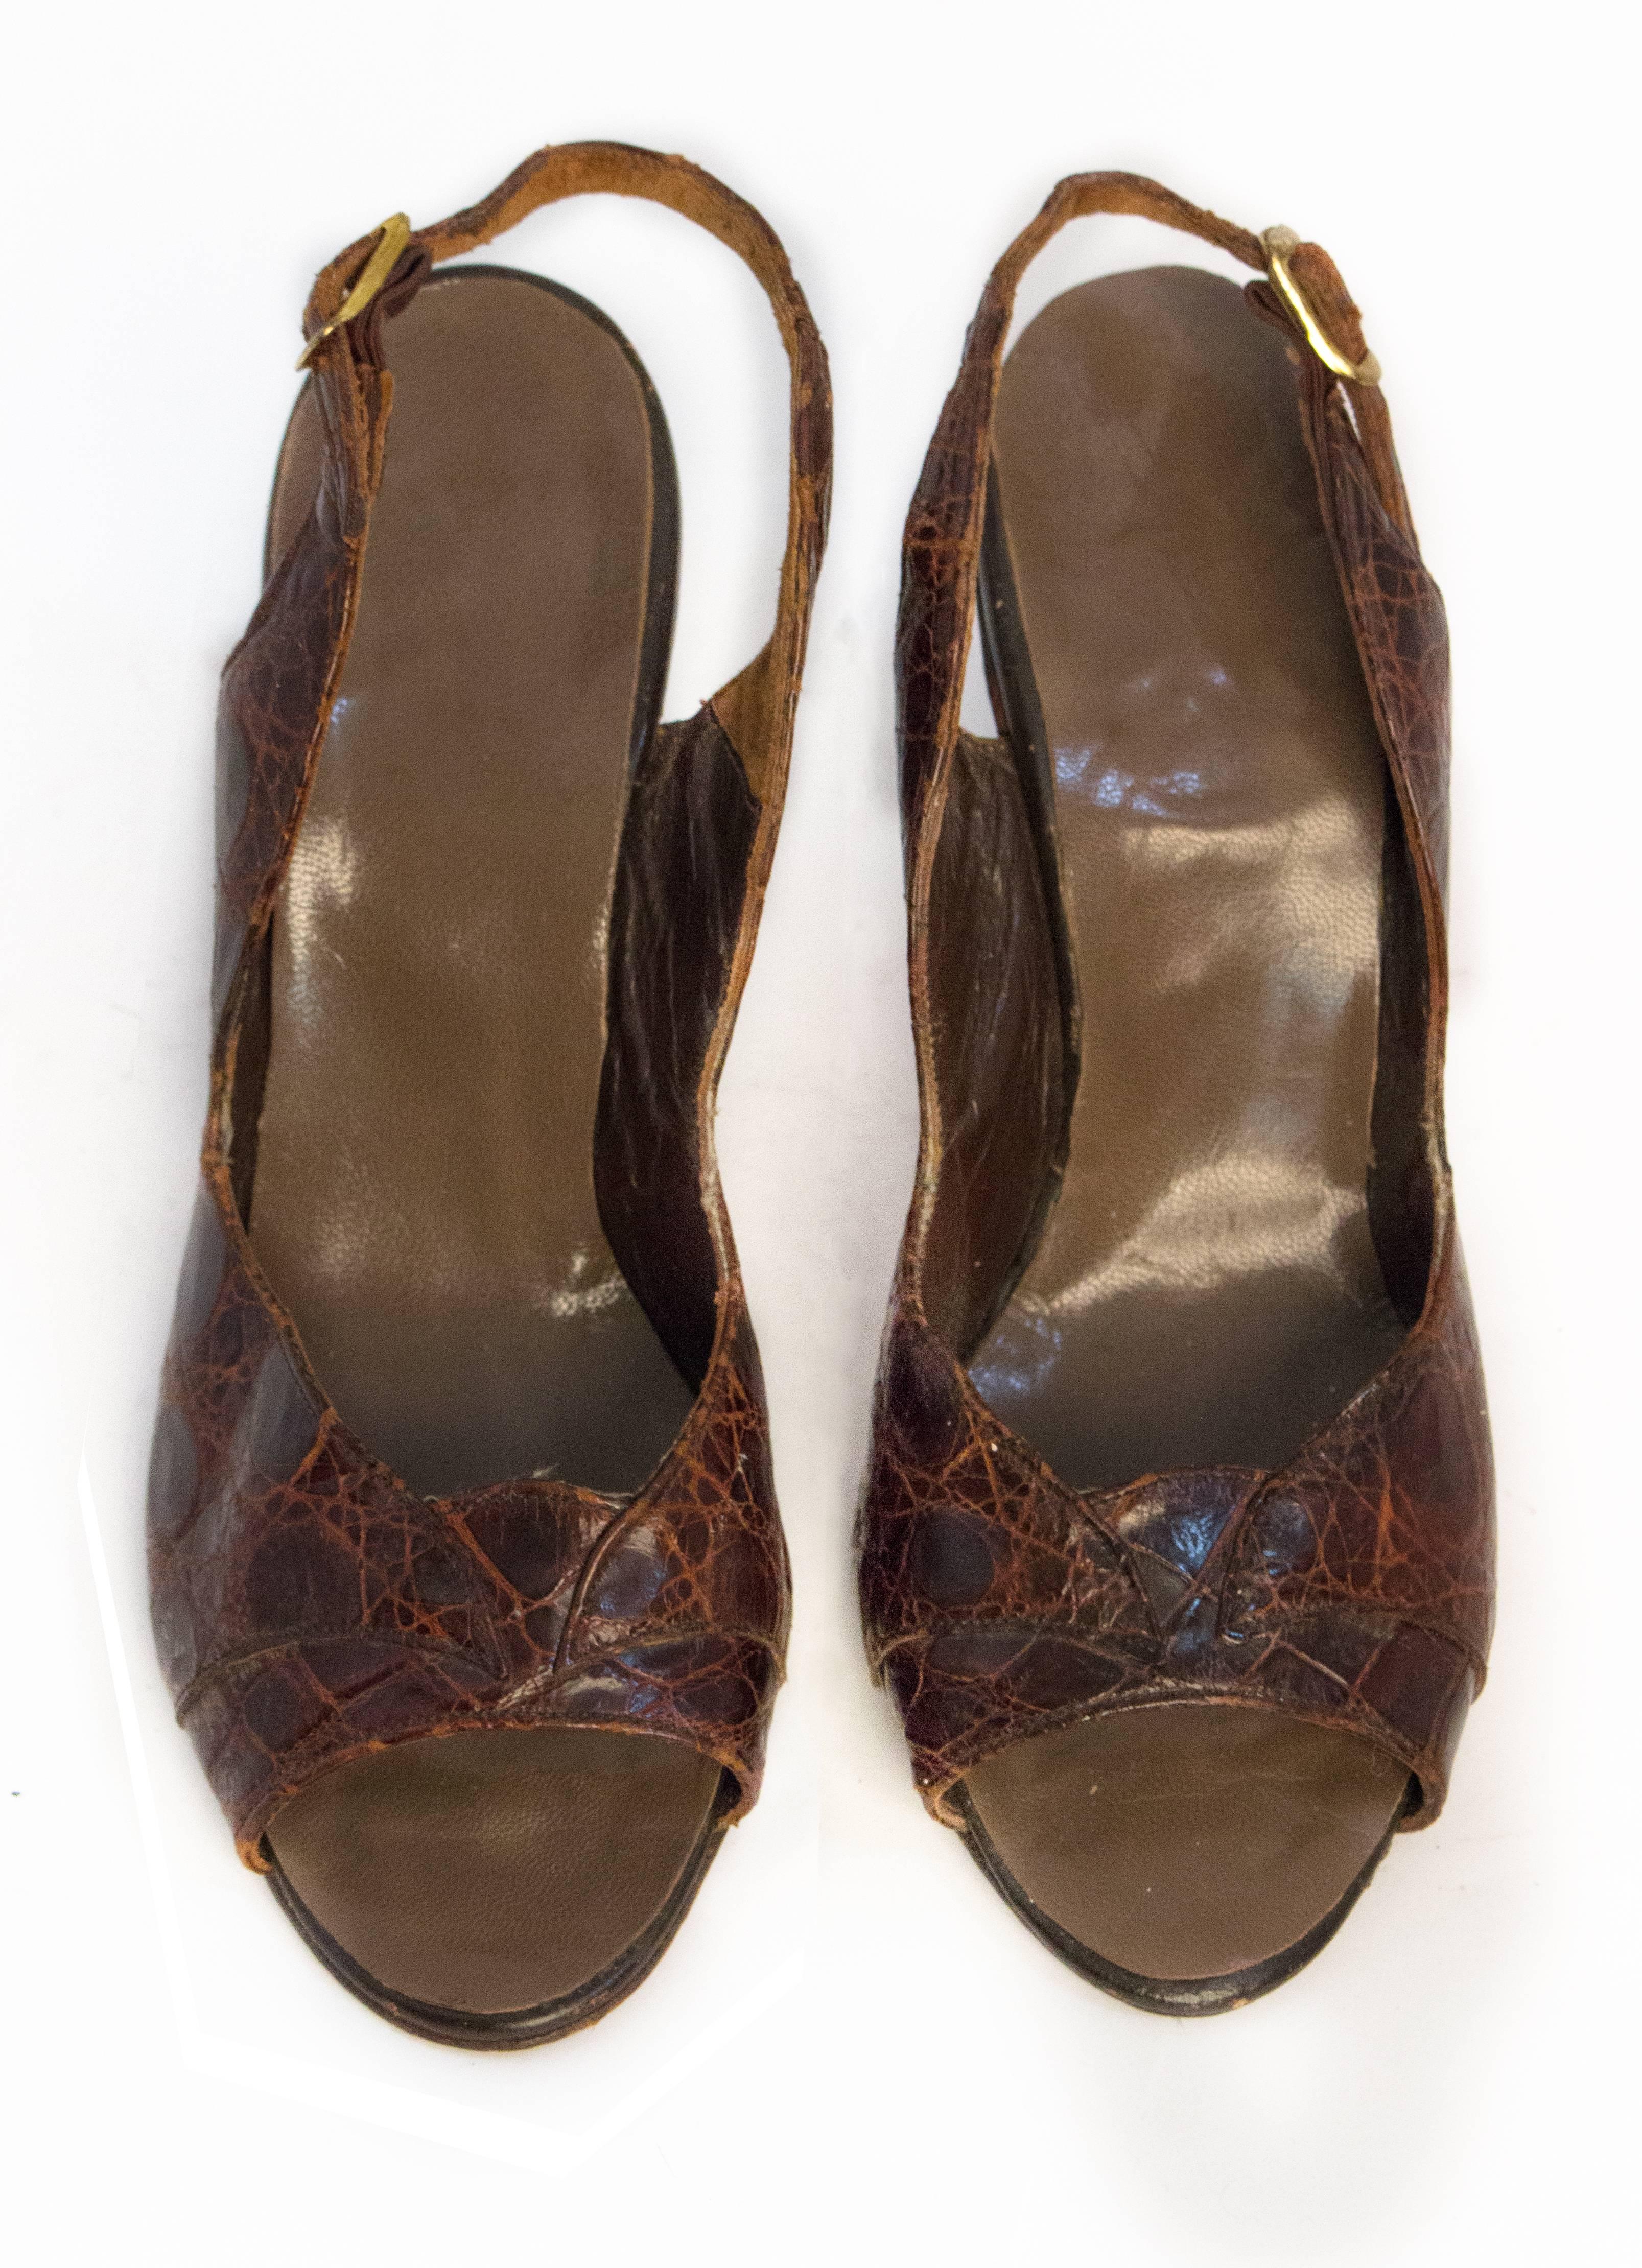 50s Brown Alligator Peptone Slingback Heels. Gold tone buckle. Leather sole. 

Measurements:
Insole: 8.5 inches 
Palm: 2.75 inches
Heel Height: 3.25 inches 